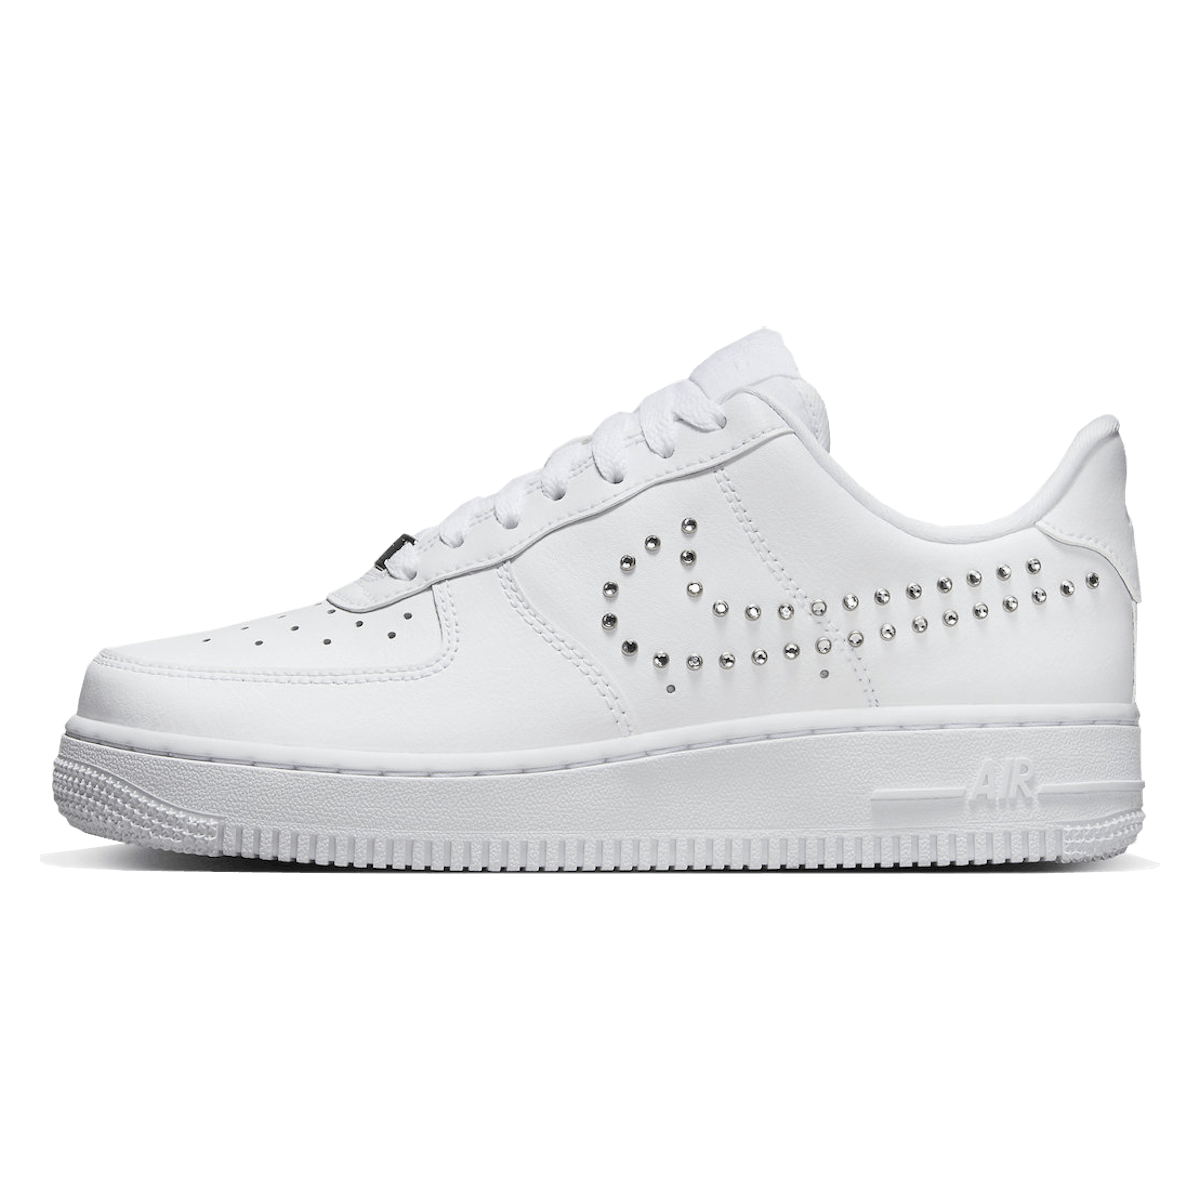 Nike Air Force 1 Low "Silver Studs"